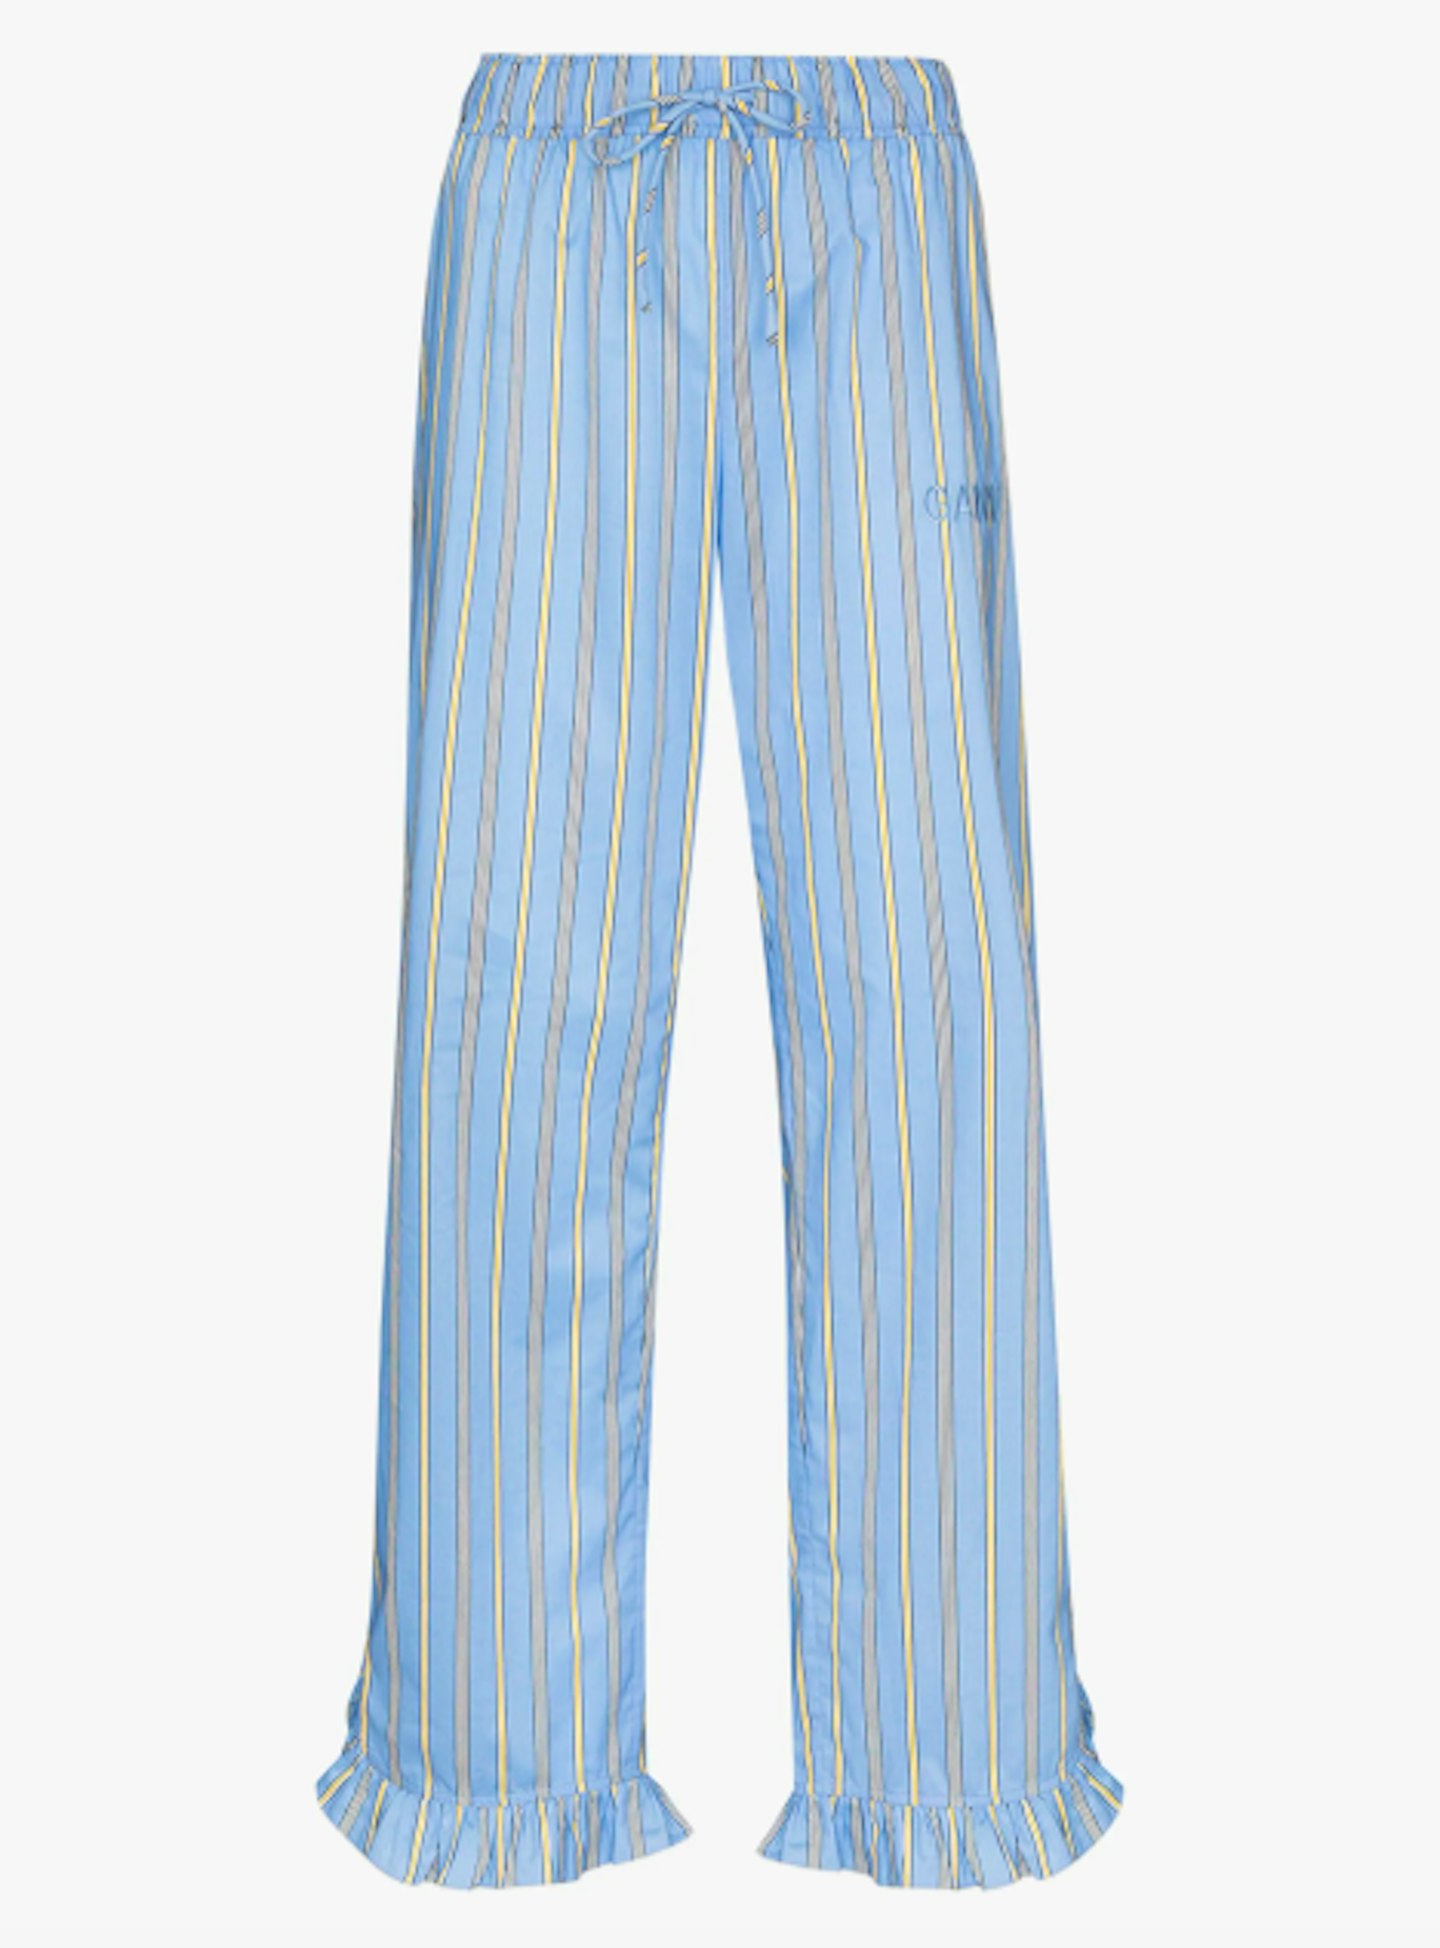 Ganni, Striped Cotton Pyjama Trousers, £115 at Browns